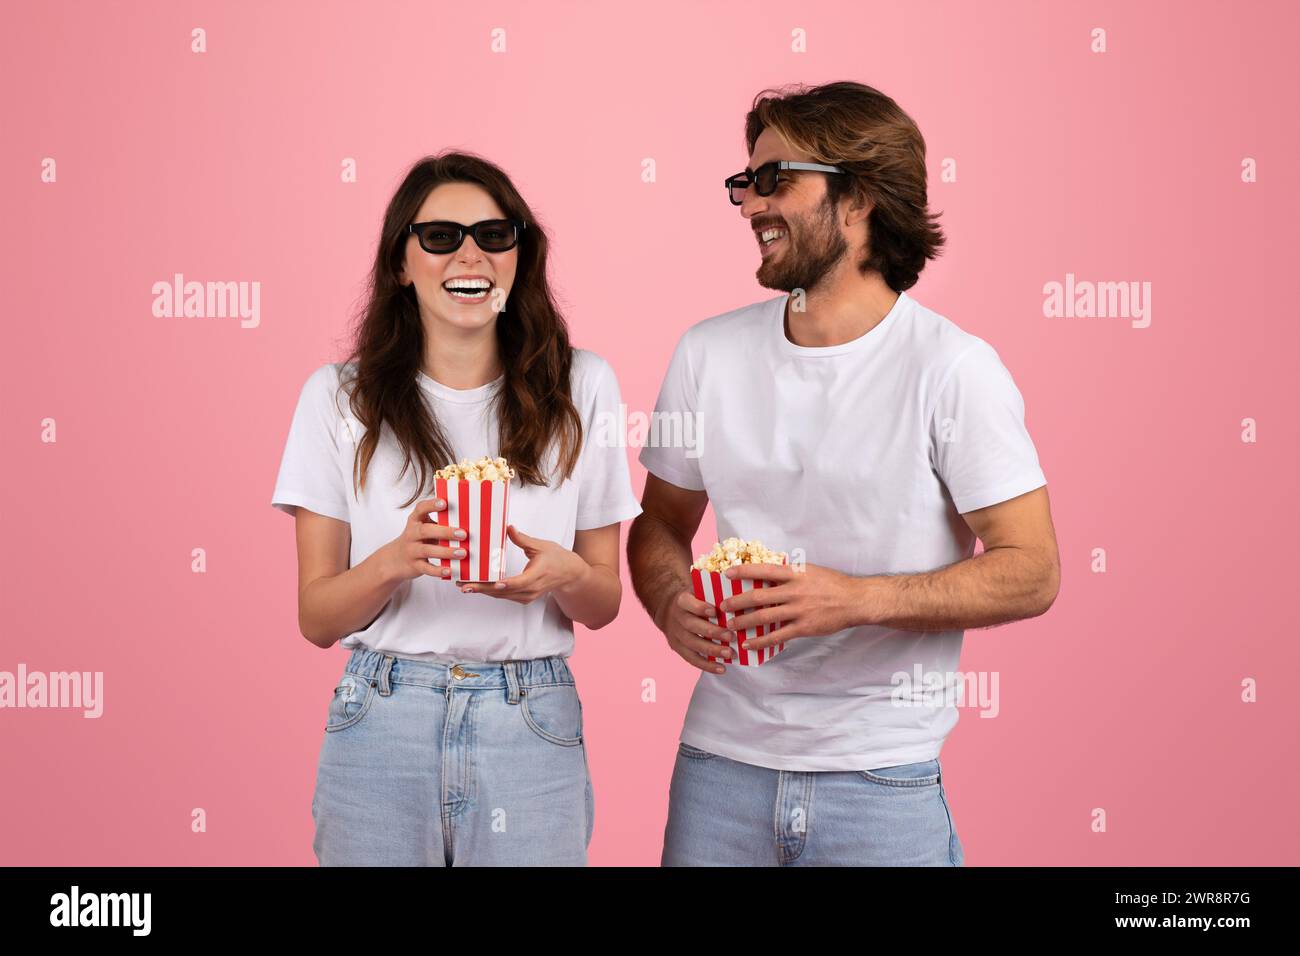 Laughing woman and man wearing 3D glasses and holding red and white striped popcorn boxes Stock Photo